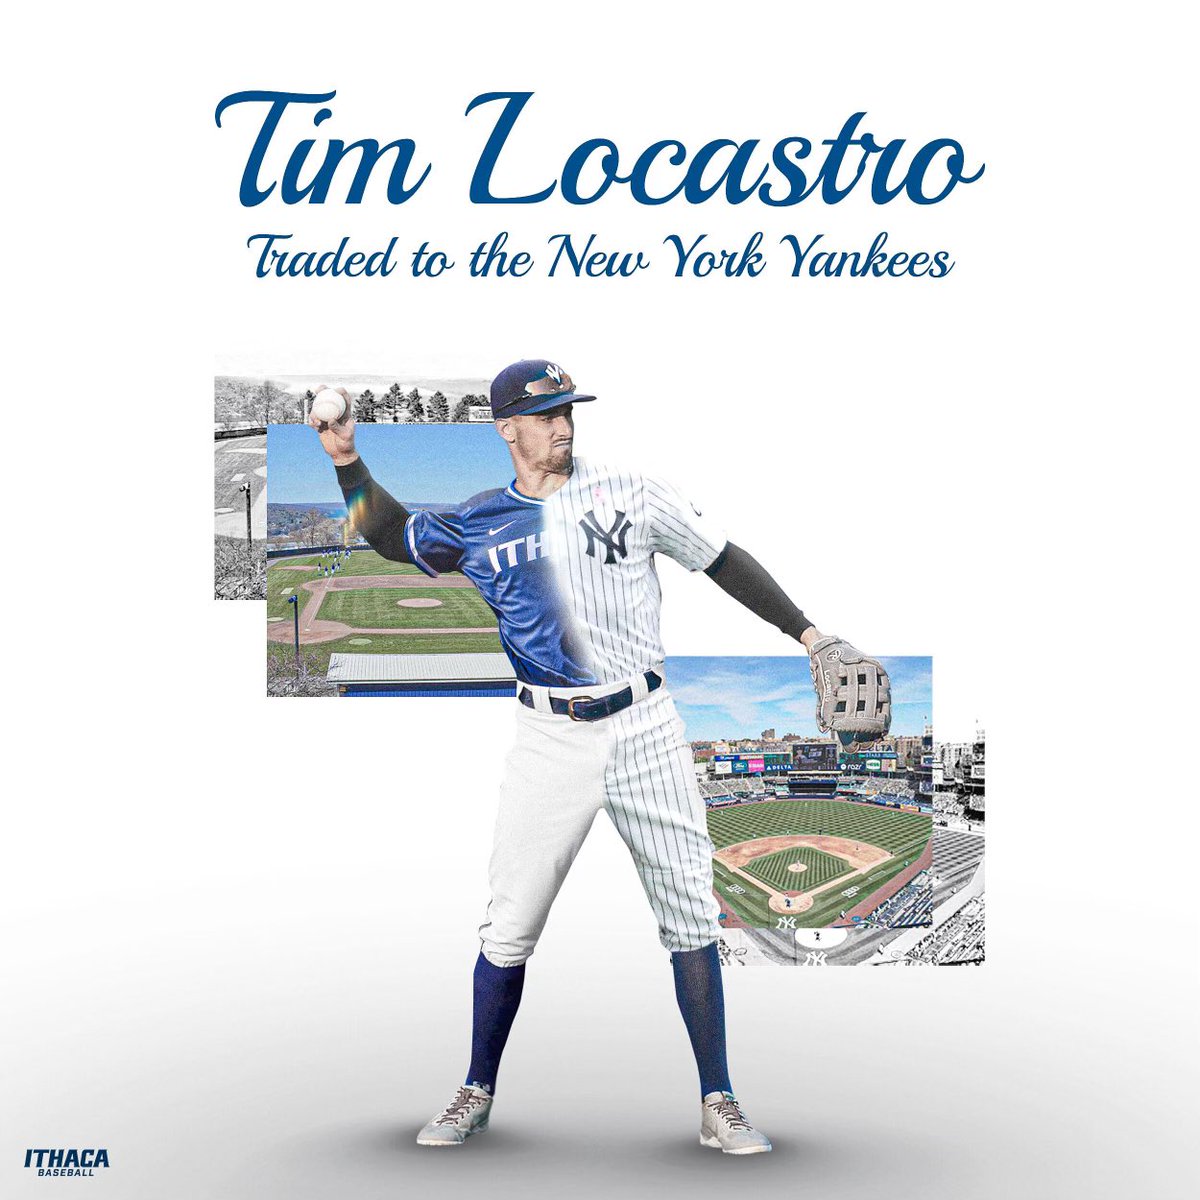 Ithaca Baseball on X: He's Home! Tim Locastro will suit up in jersey #33  for the New York Yankees tonight in Game 1 of the Subway Series against the  Mets! #GoBombers  /